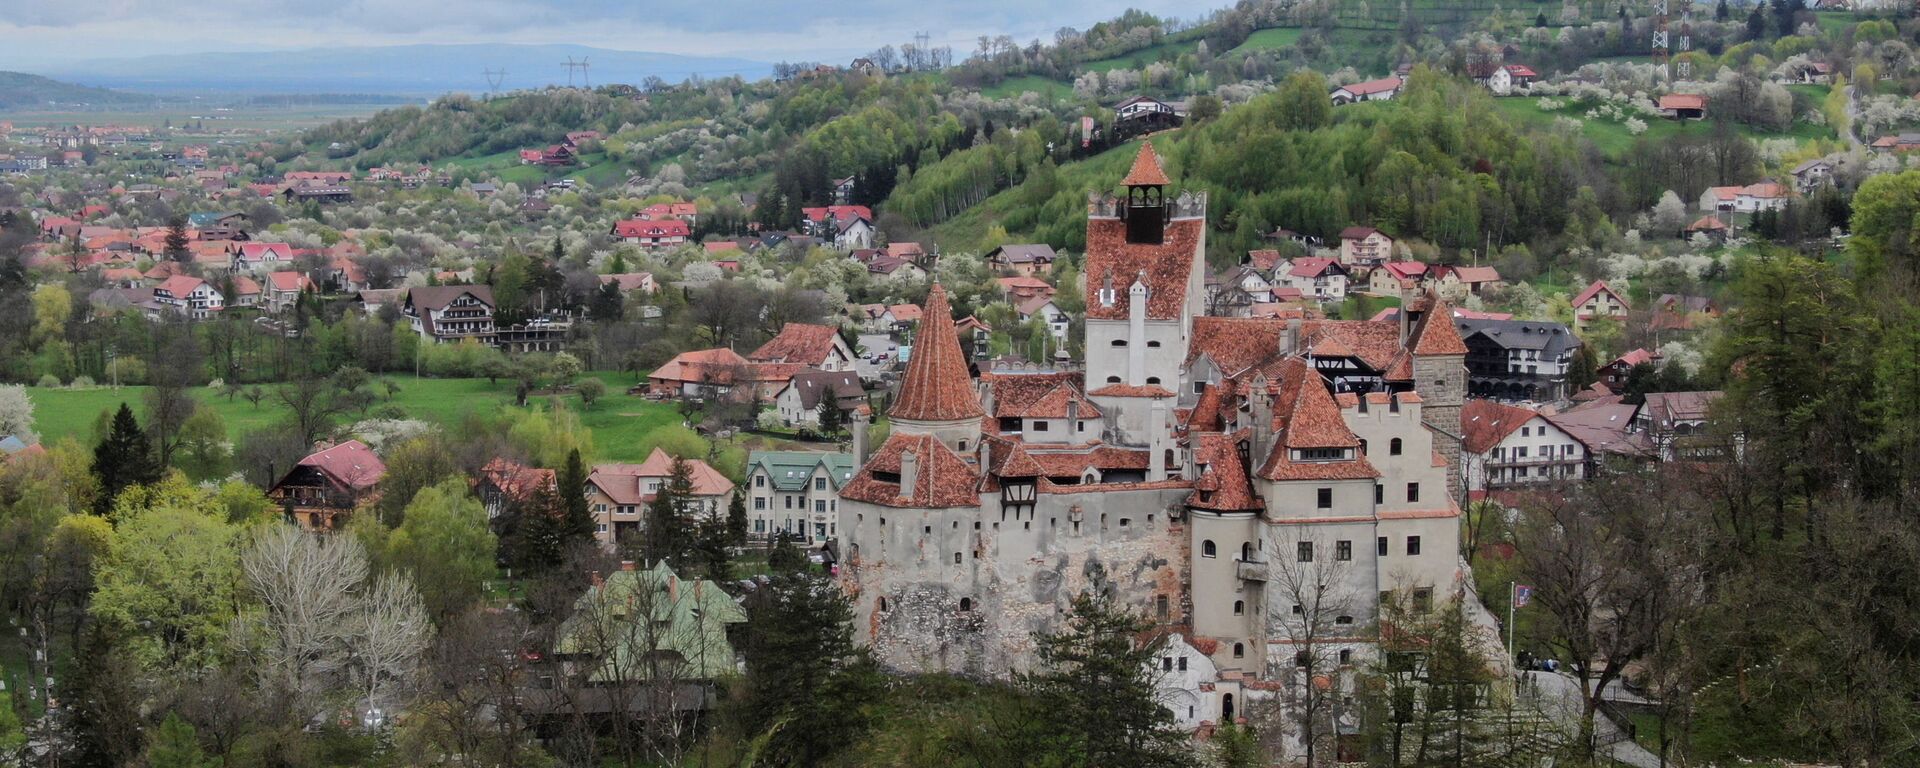 Bran Castle towers above Bran commune, in Brasov county, Romania, May 8, 2021. Picture taken with a drone.  - Sputnik International, 1920